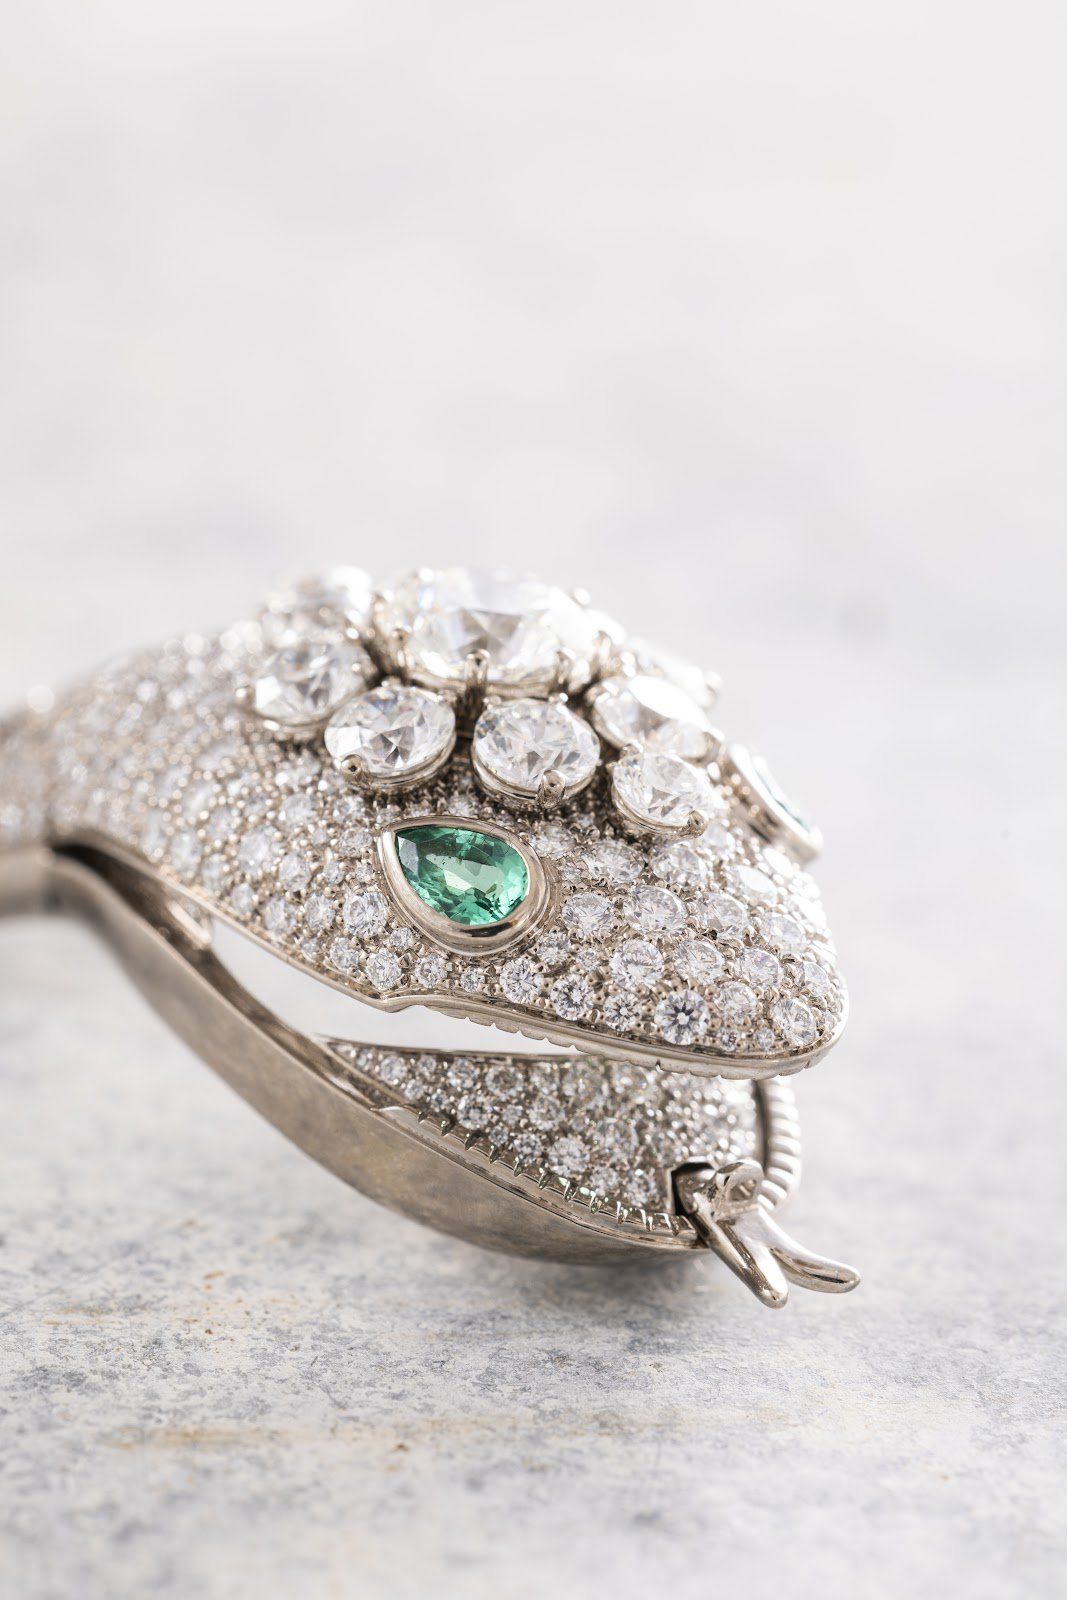 A flick of the serpent’s tongue reveals the dazzling diamond dial.